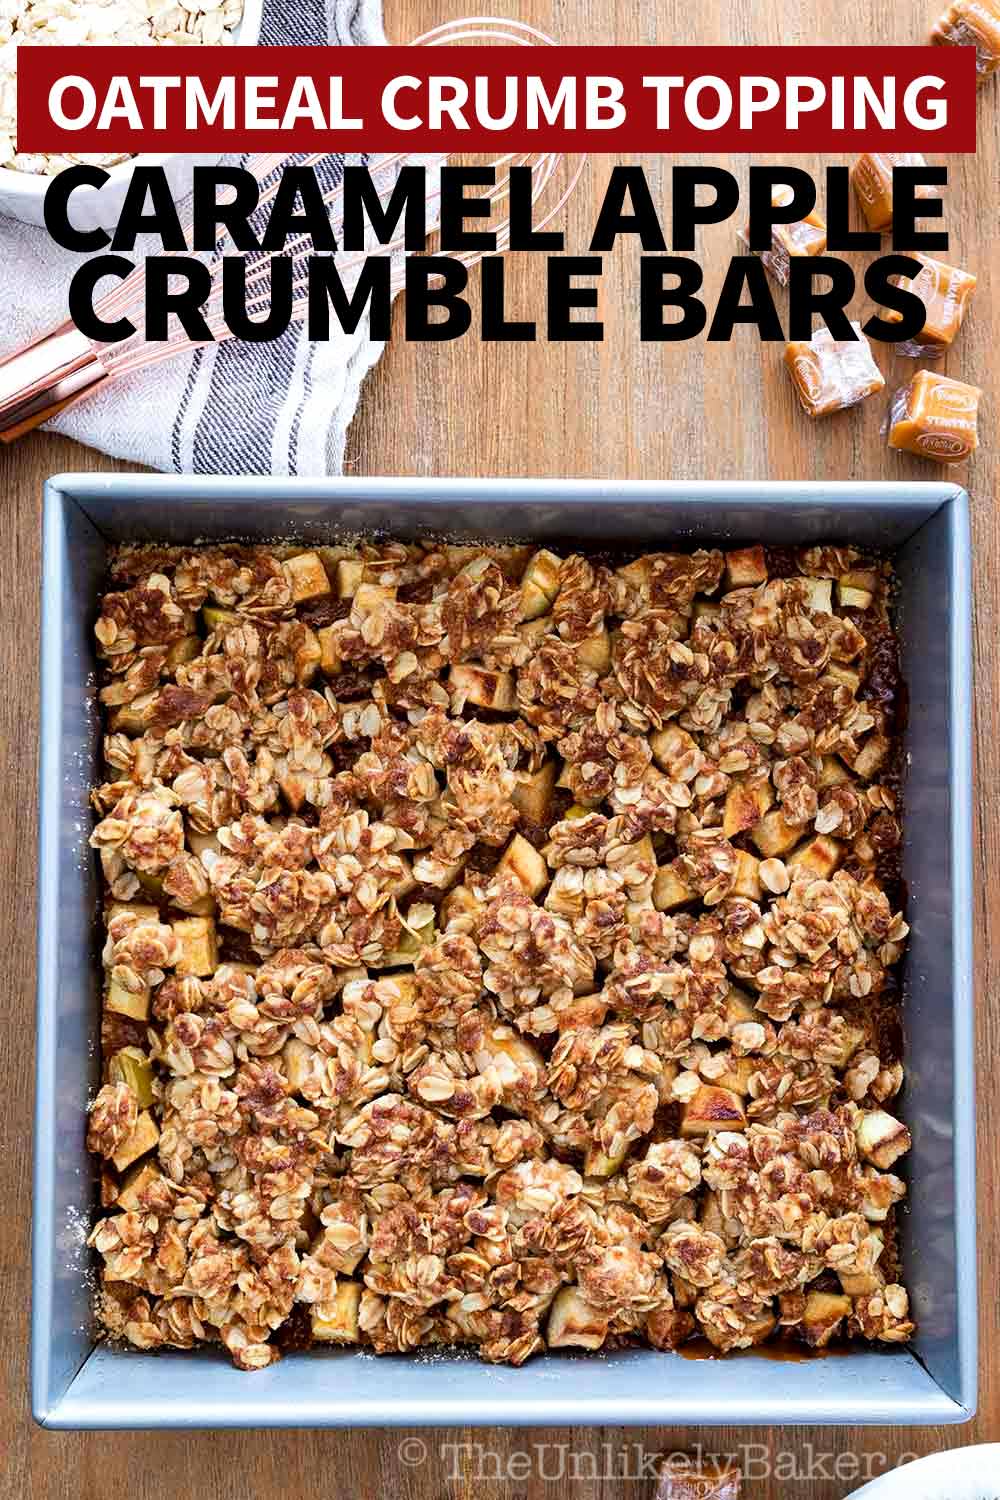 Apple Crumble Bars The Unlikely Baker 174 